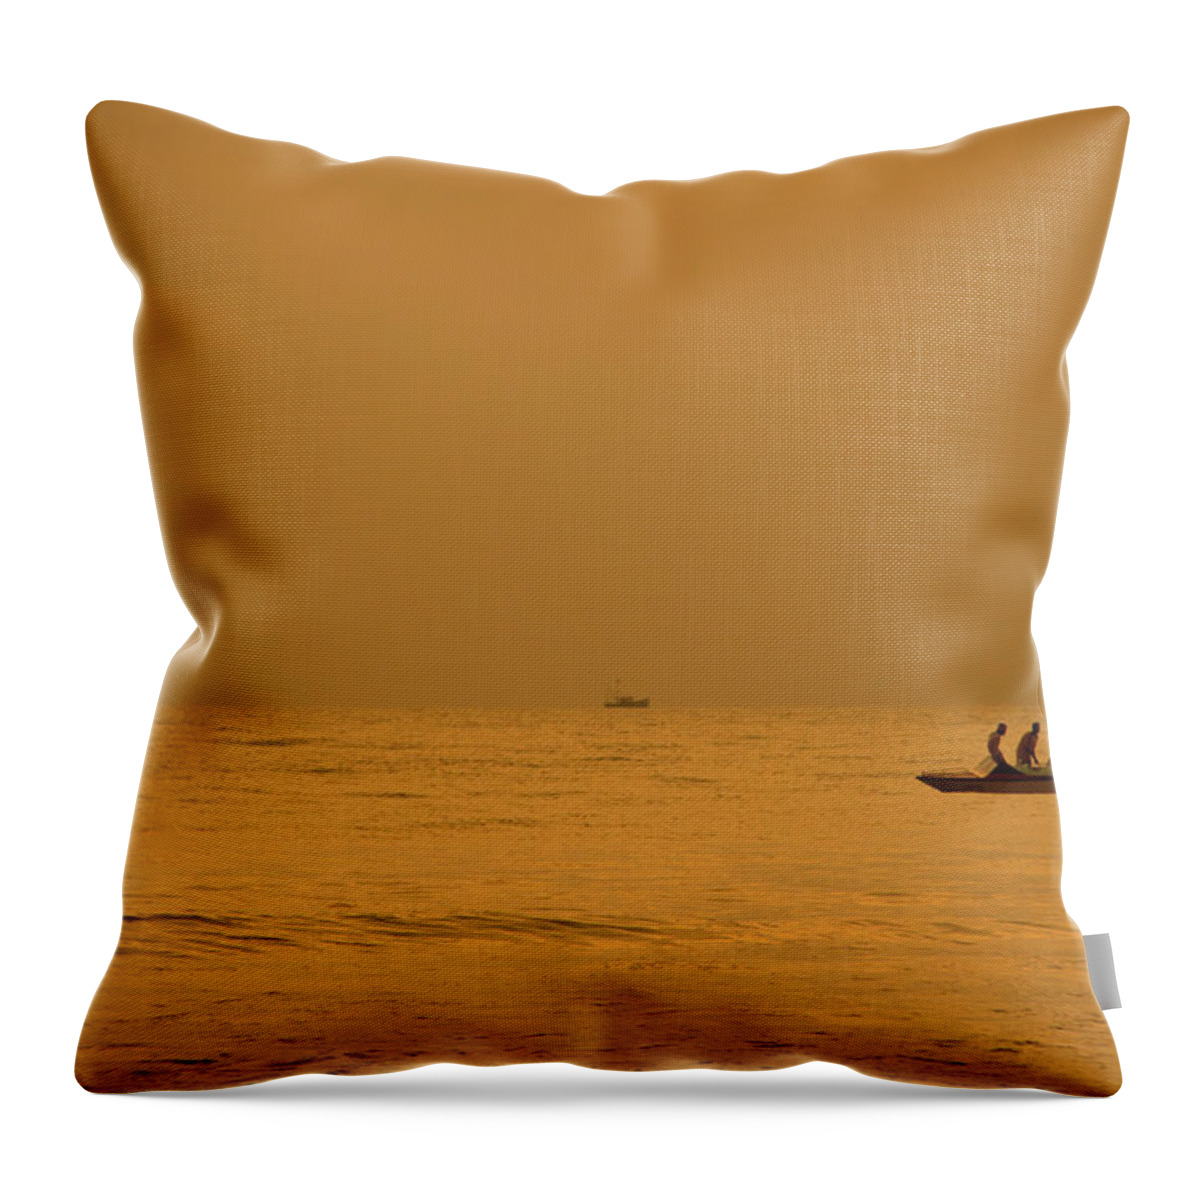 Orange Color Throw Pillow featuring the photograph Fishreman Catching Fish At Payyambalam by Raja Singh - Bling Photography